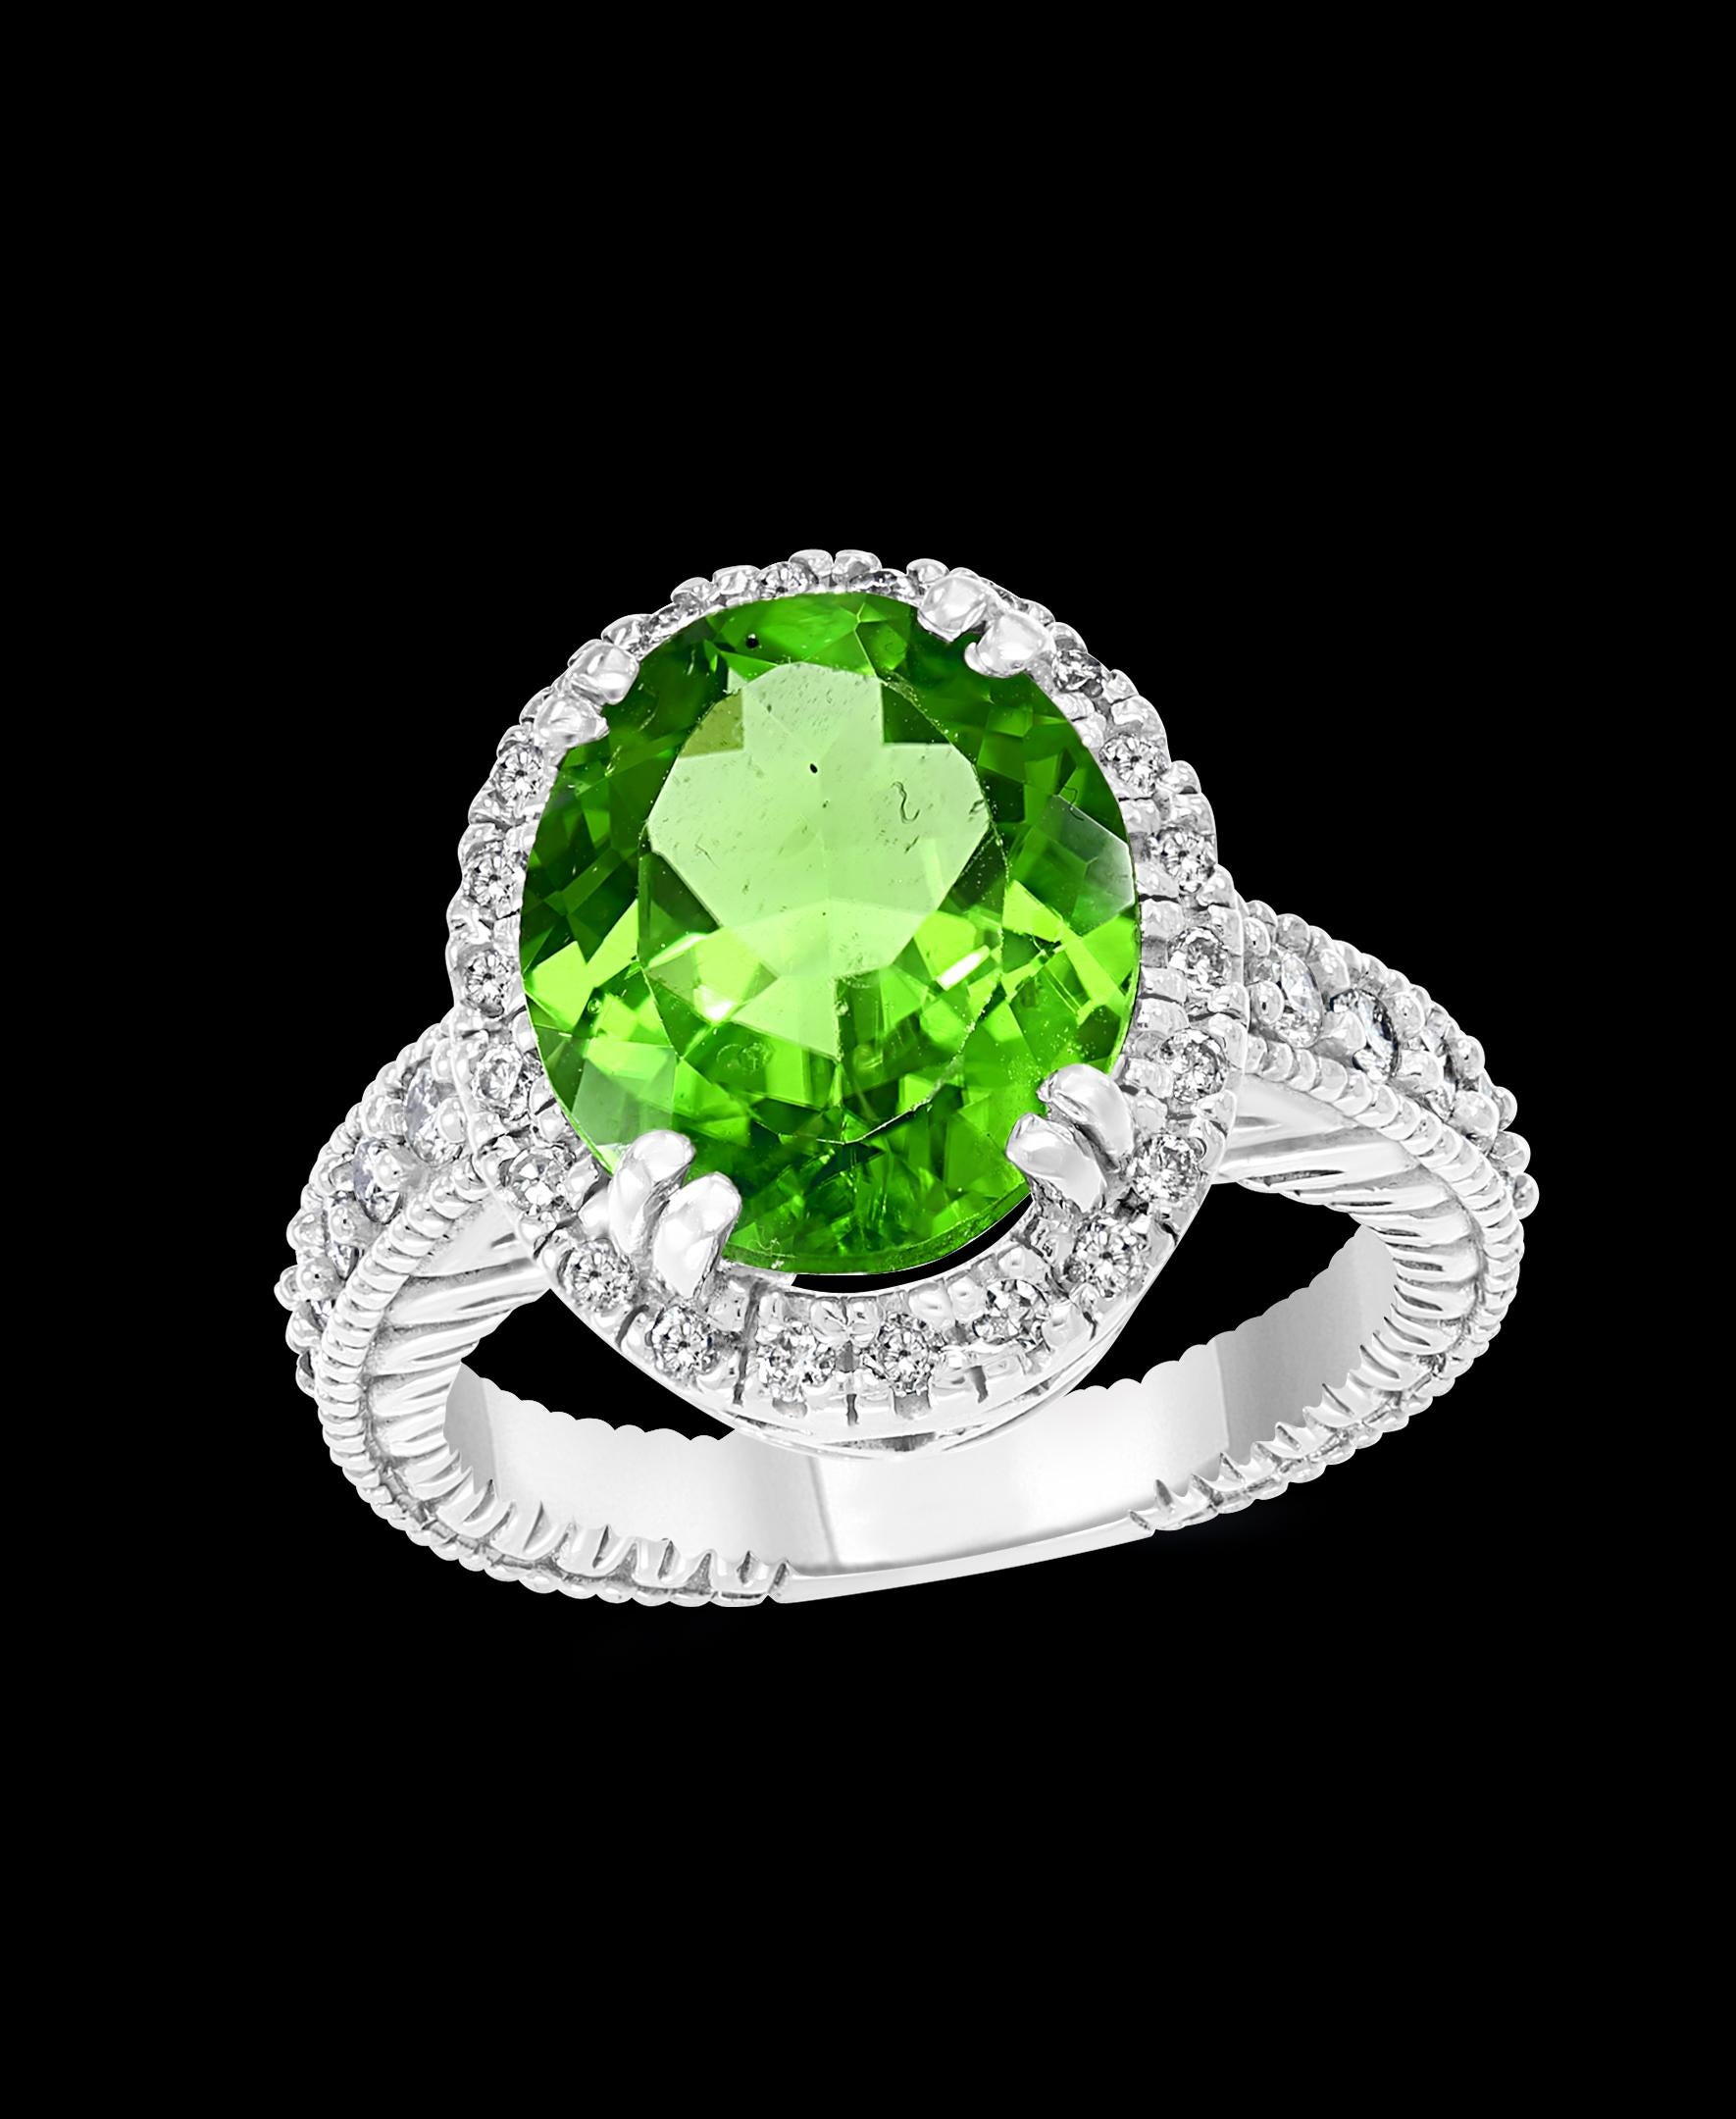 A classic, Cocktail ring 
7 Carat of very clean Pear Shape Peridot full of luster and shine and Diamond ring
Gold: 14 carat White gold 
Weight: 9 gram
Ring size 7
Diamonds: approximate 1.2 Carat , Brilliant round shape diamonds  
It’s very hard to